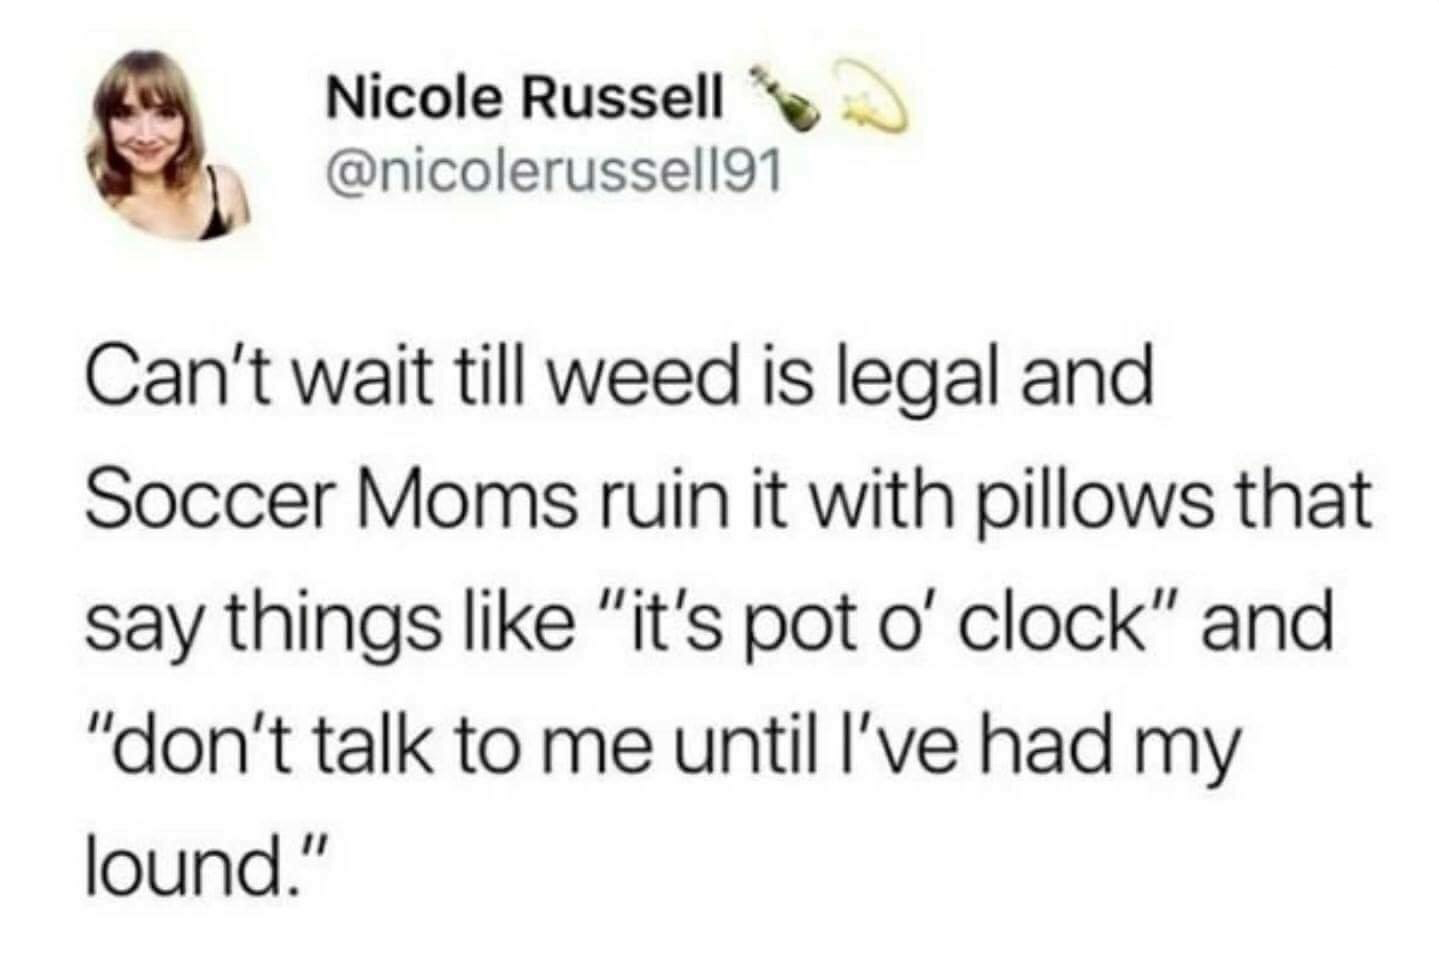 newfie turnip memes - Nicole Russell Can't wait till weed is legal and Soccer Moms ruin it with pillows that say things "it's pot o'clock" and "don't talk to me until I've had my lound."